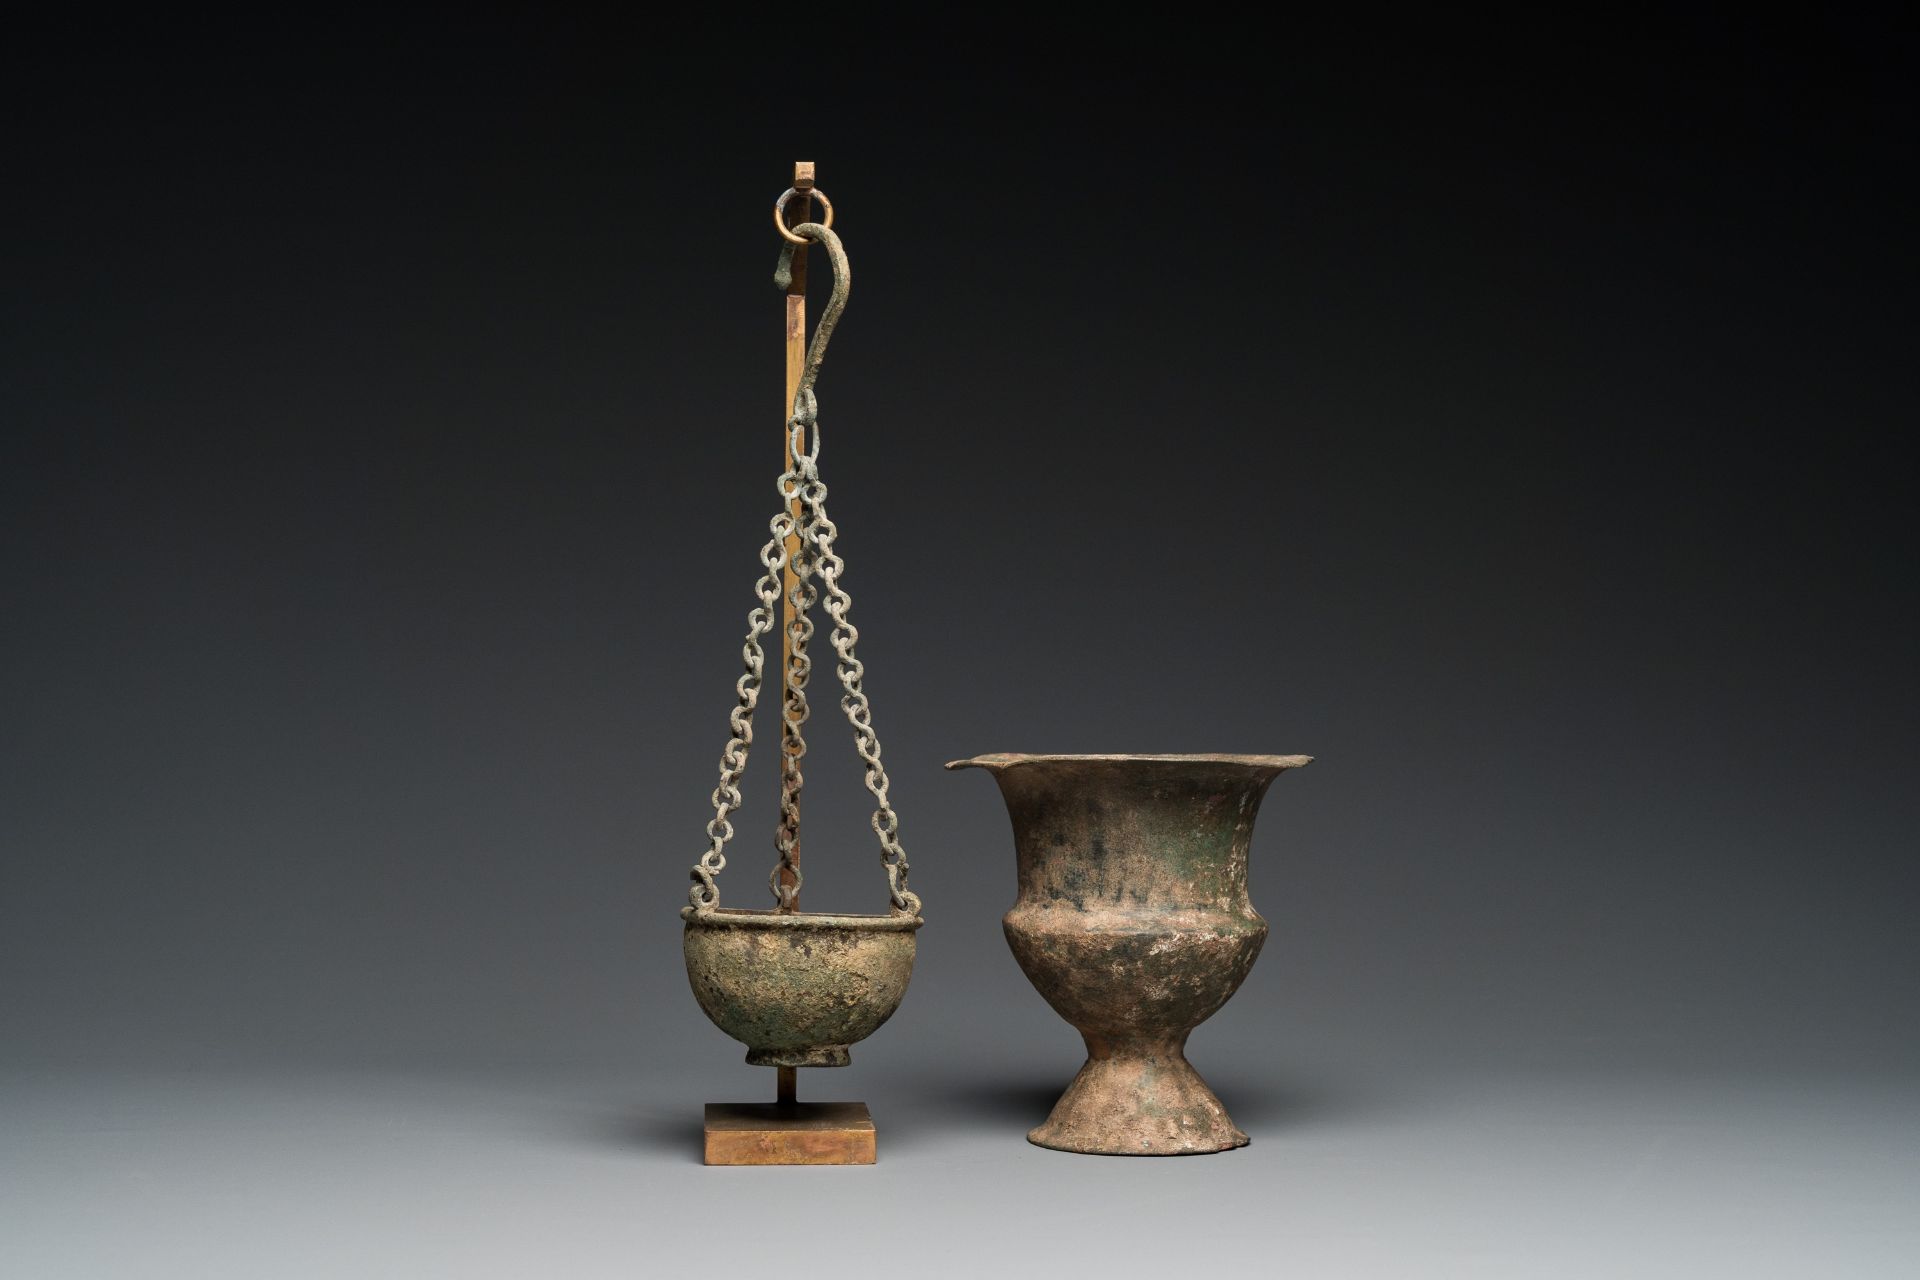 A Byzantine or Roman bronze vase and a hanging incense burner, 5/7th C. - Image 4 of 9